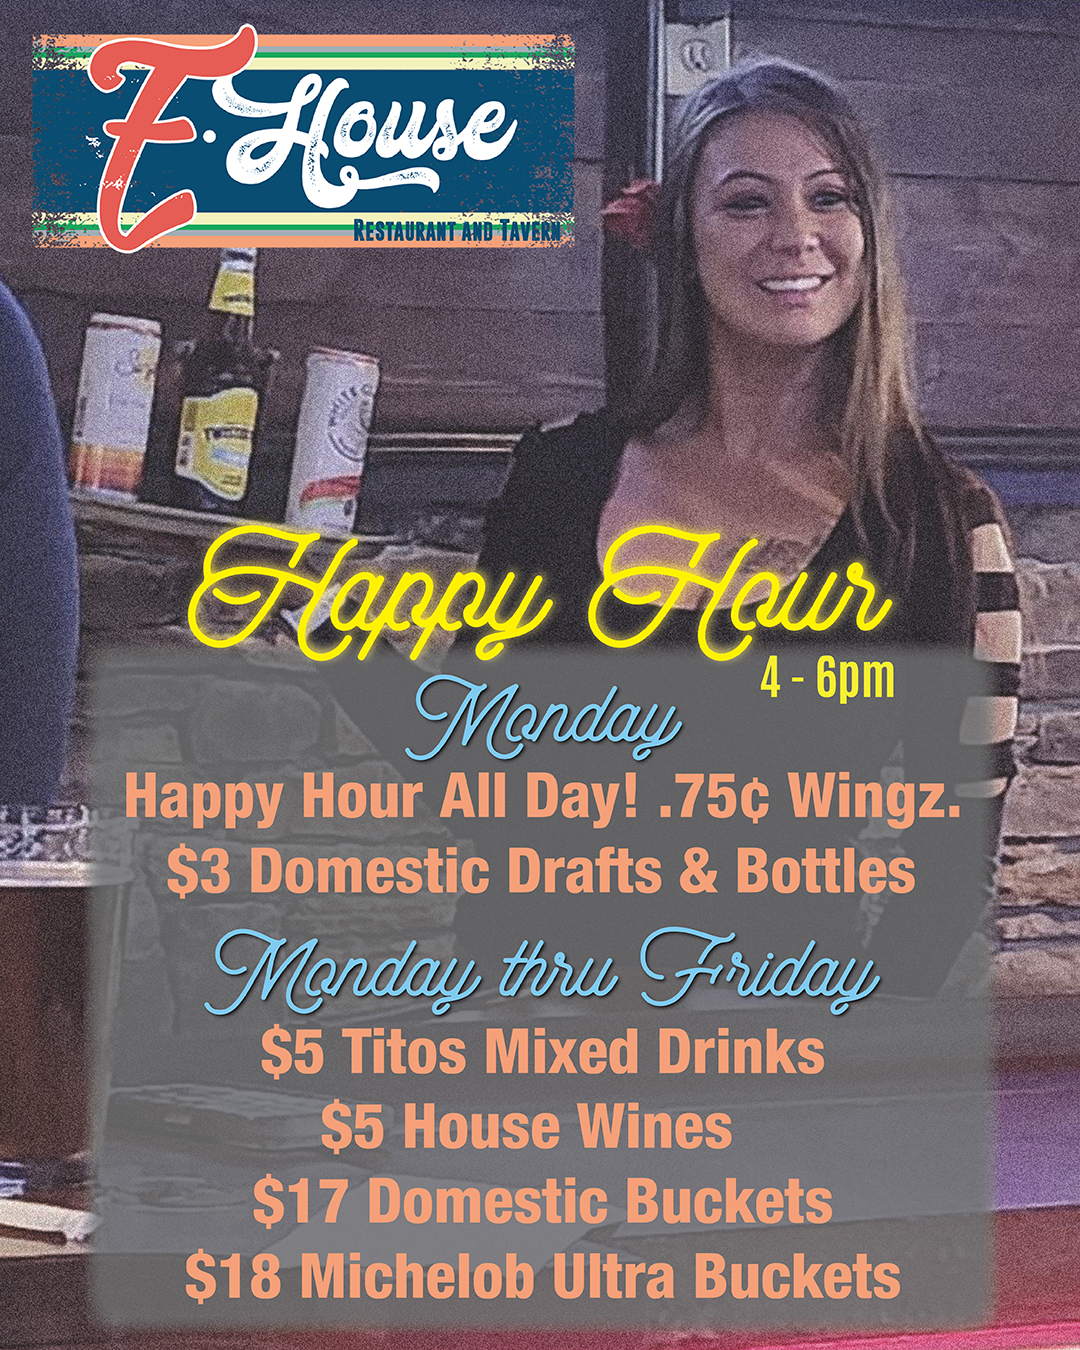 Restaurant happy hour sign with a woman in the background. Deals: Monday - 75¢ wings, $3 domestic drafts/bottles. Monday to Friday - $5 Titos/wine, $17 domestic buckets, $18 Michelob Ultra buckets. 4-6 pm.